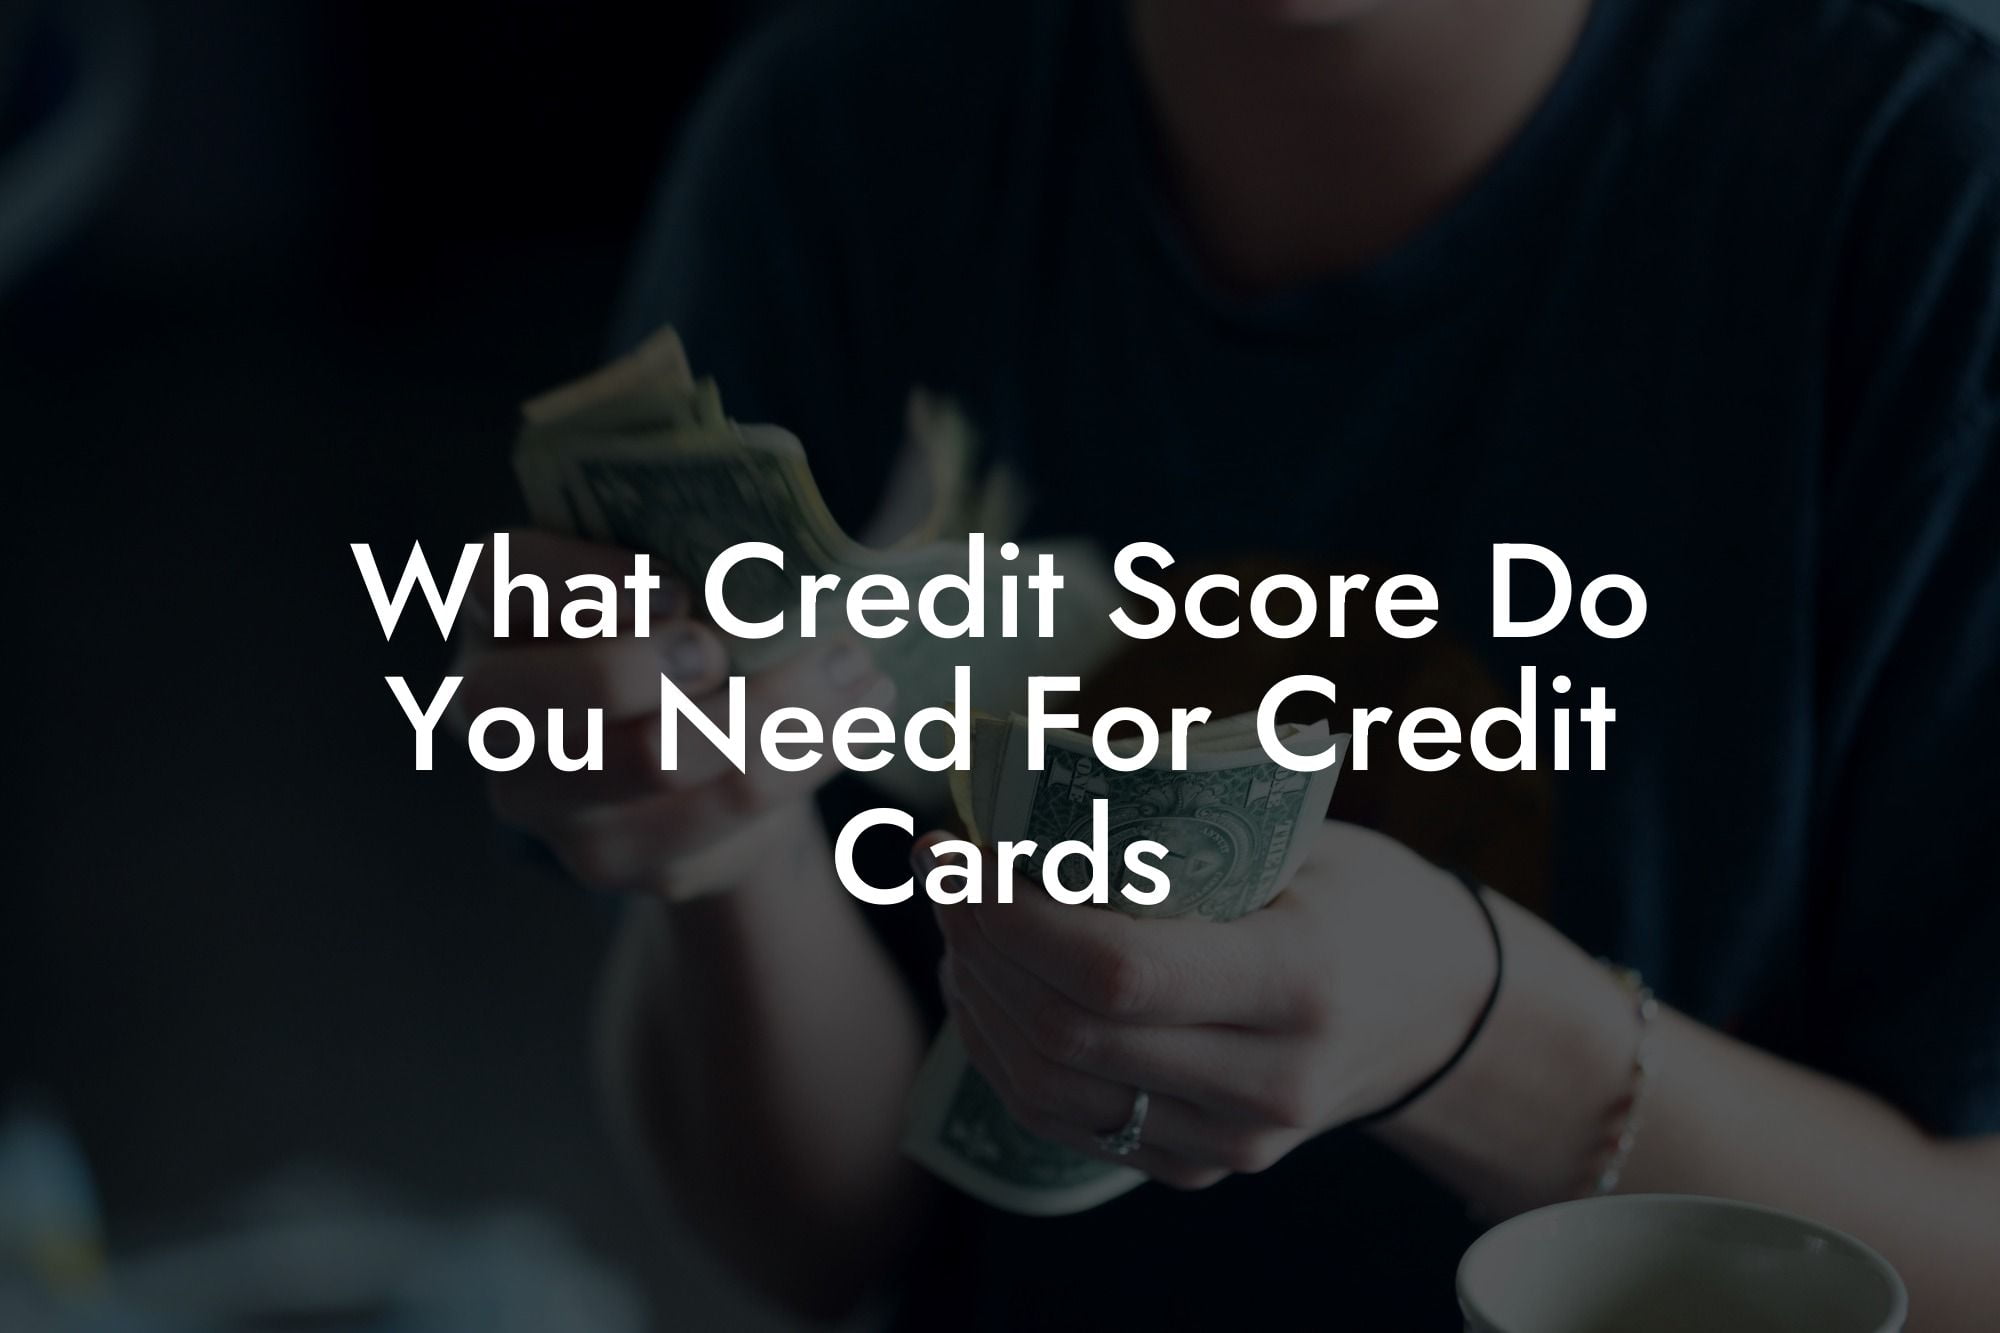 What Credit Score Do You Need For Credit Cards